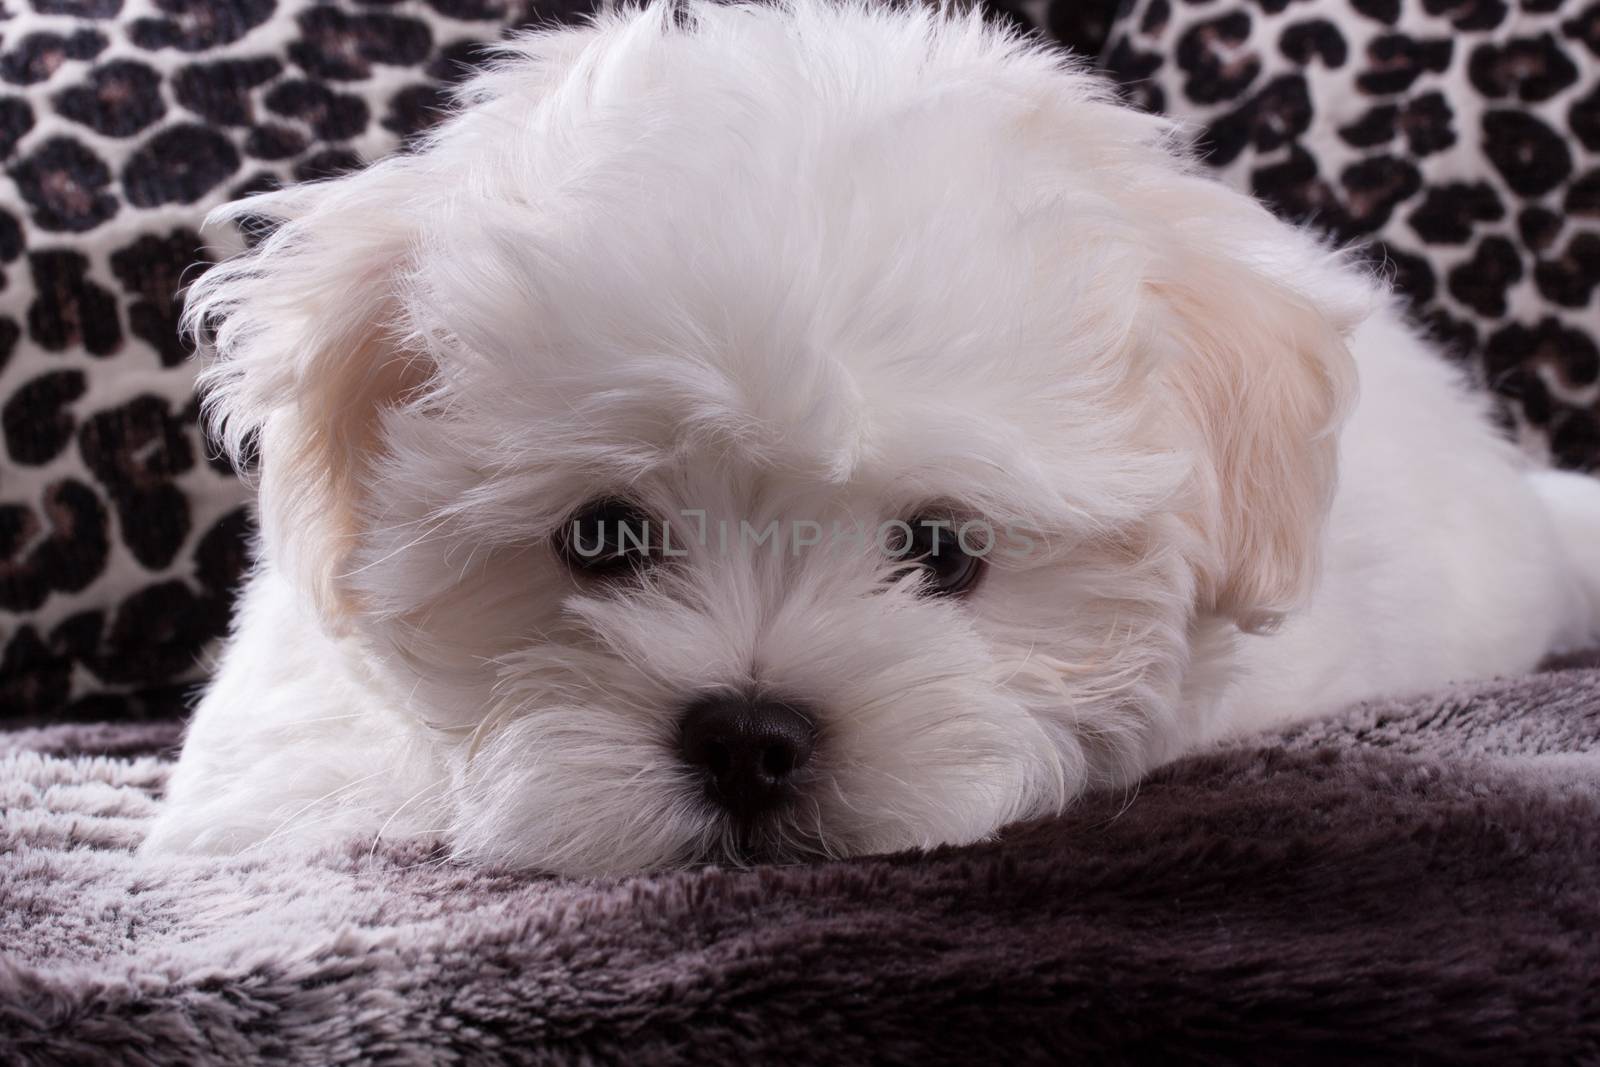 Adorable two months white Shih tzu puppy by lanalanglois